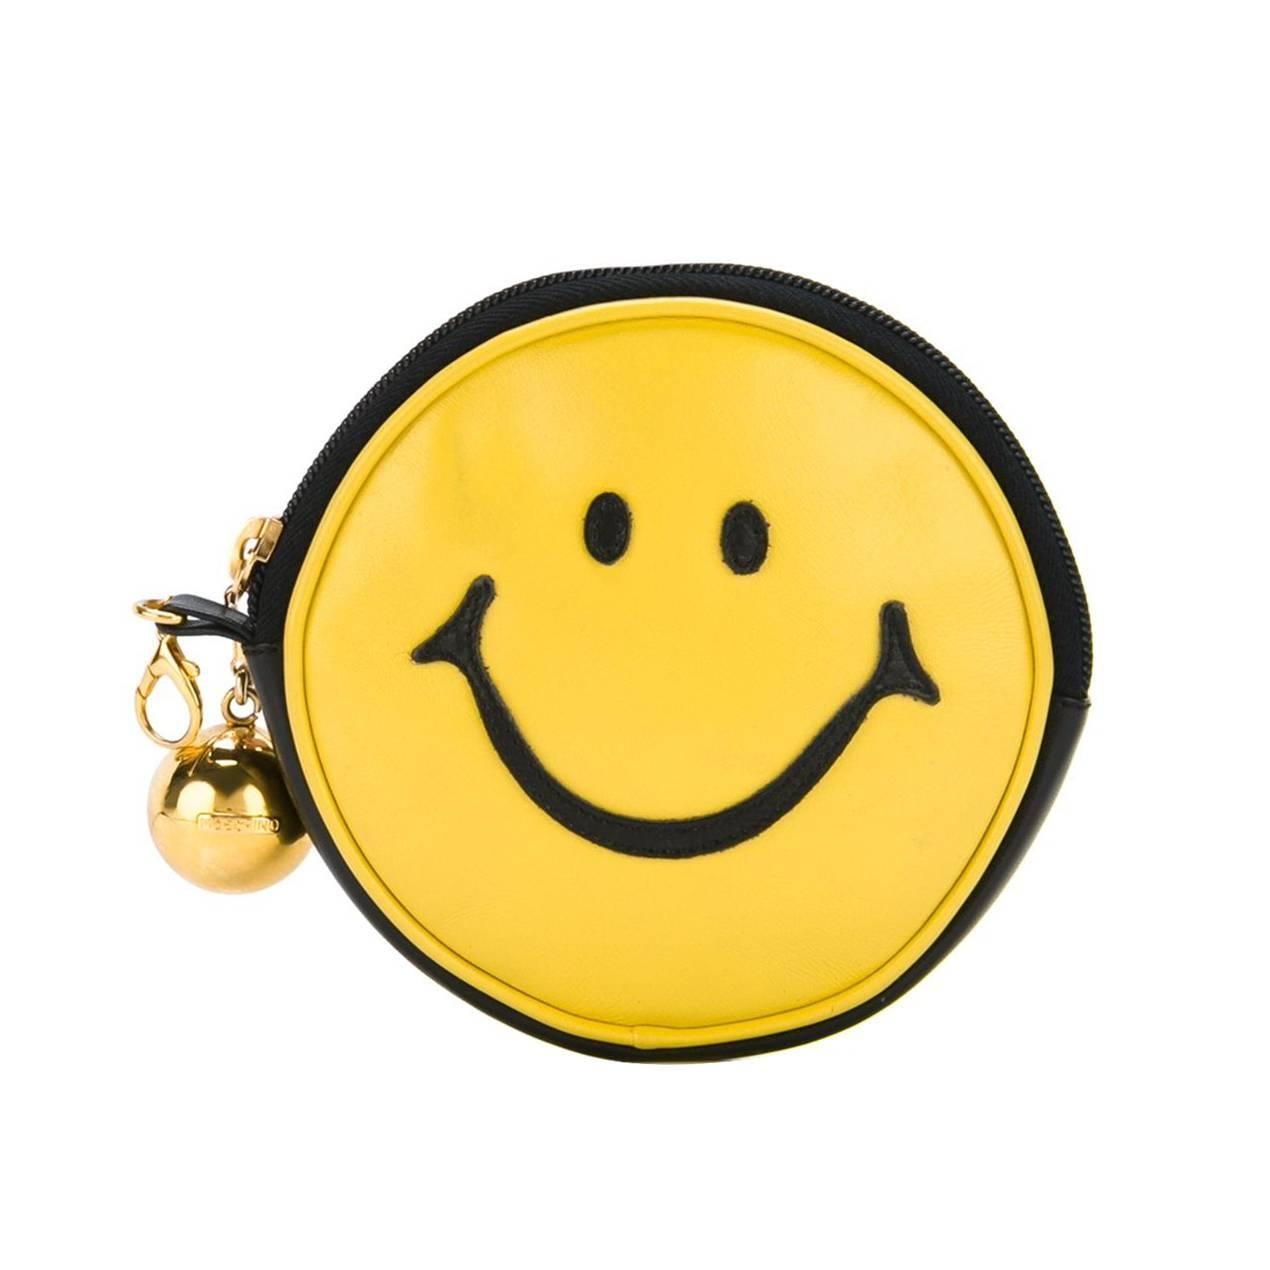 Moschino Vintage "Smiley Face" Pouch